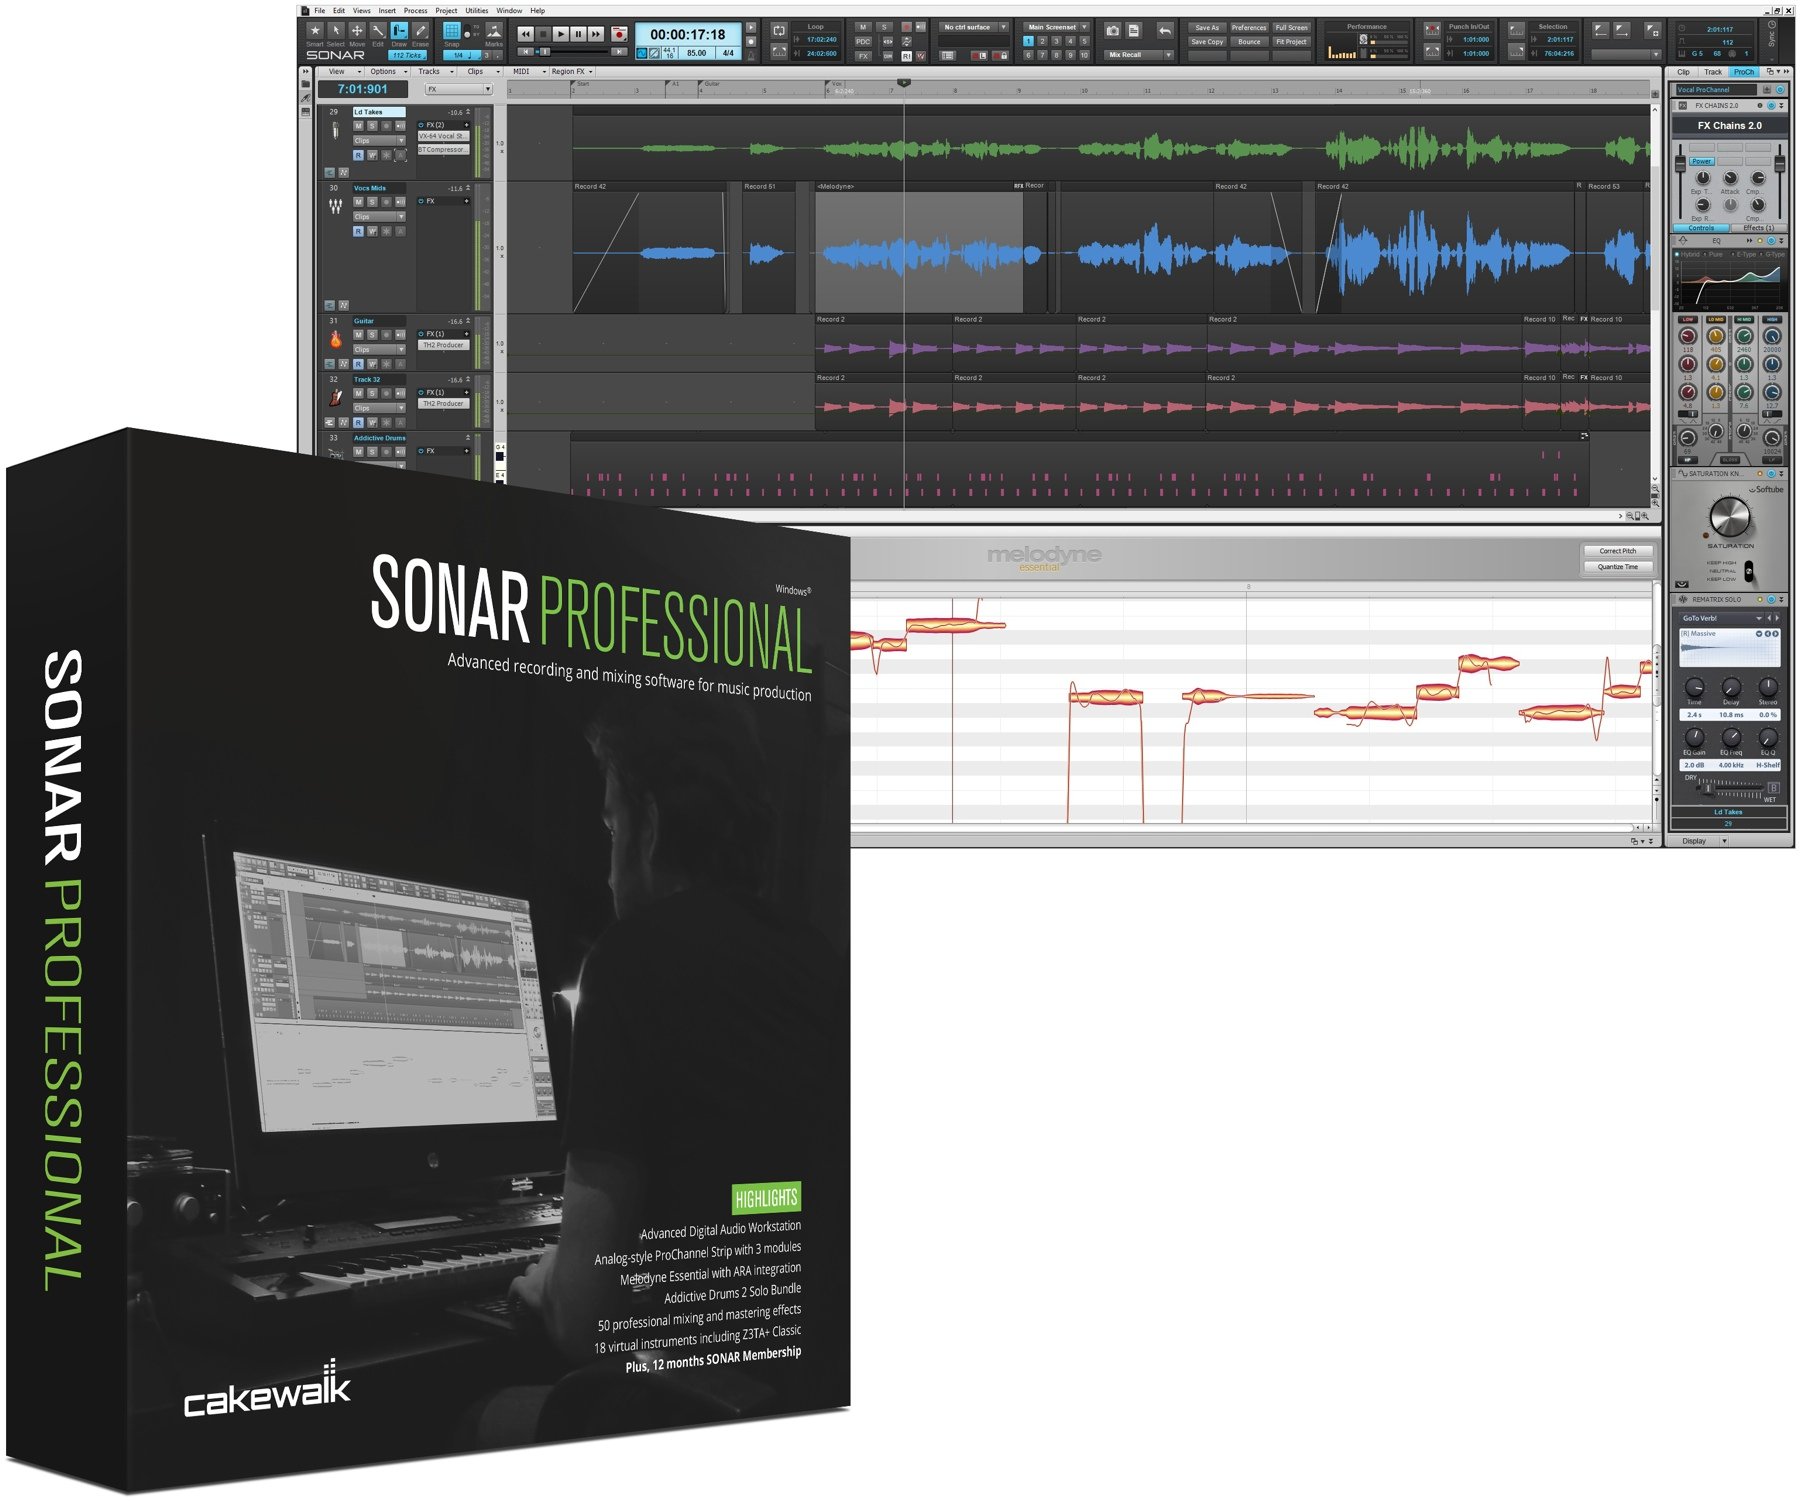 sonar x3 producer free download